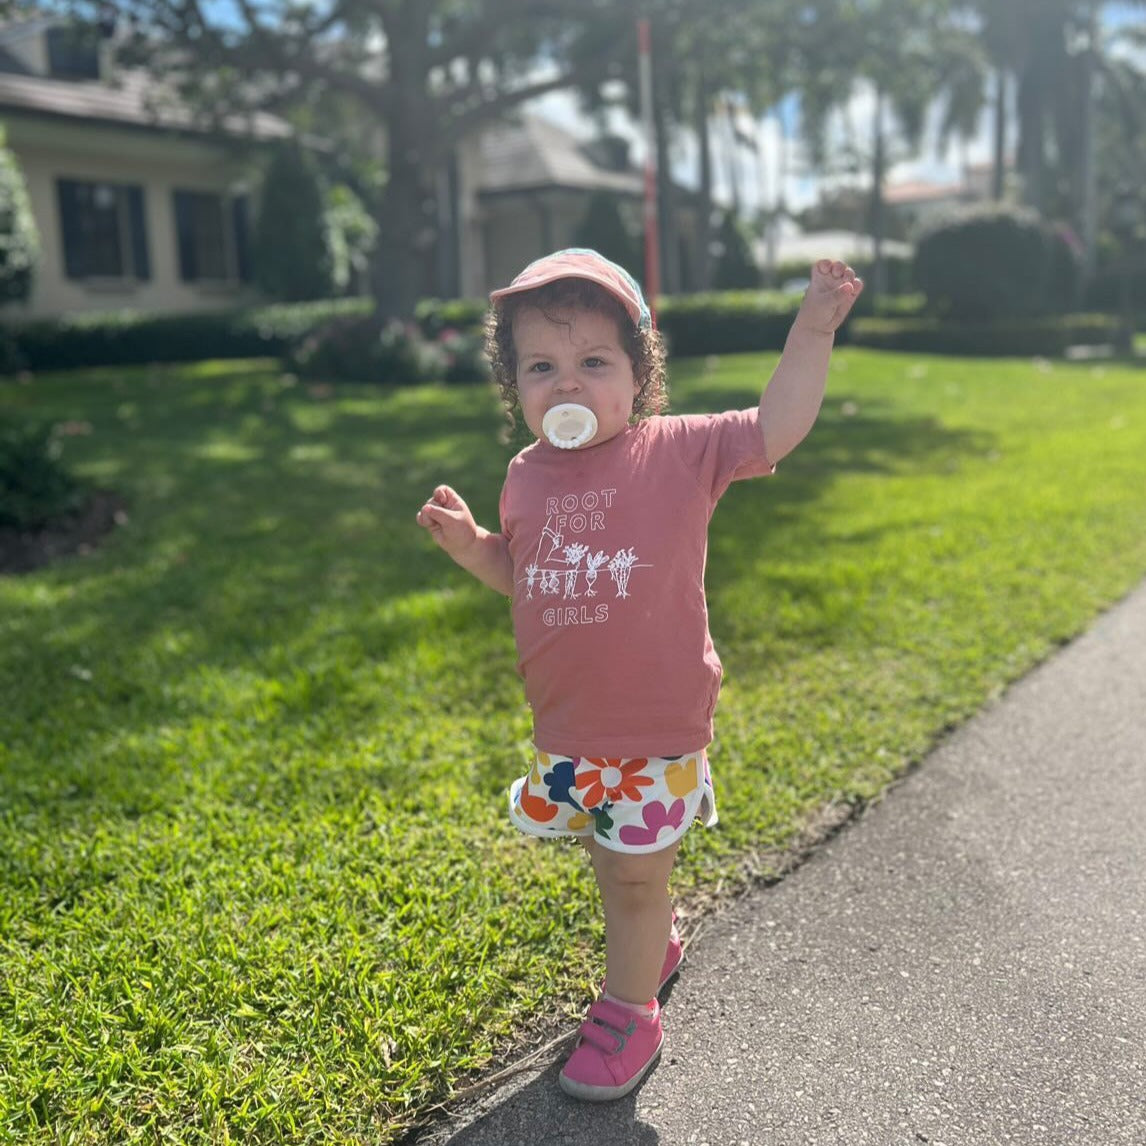 A toddler wears a mauve "Root for Girls" tee with flowered shorts and pink sneakers